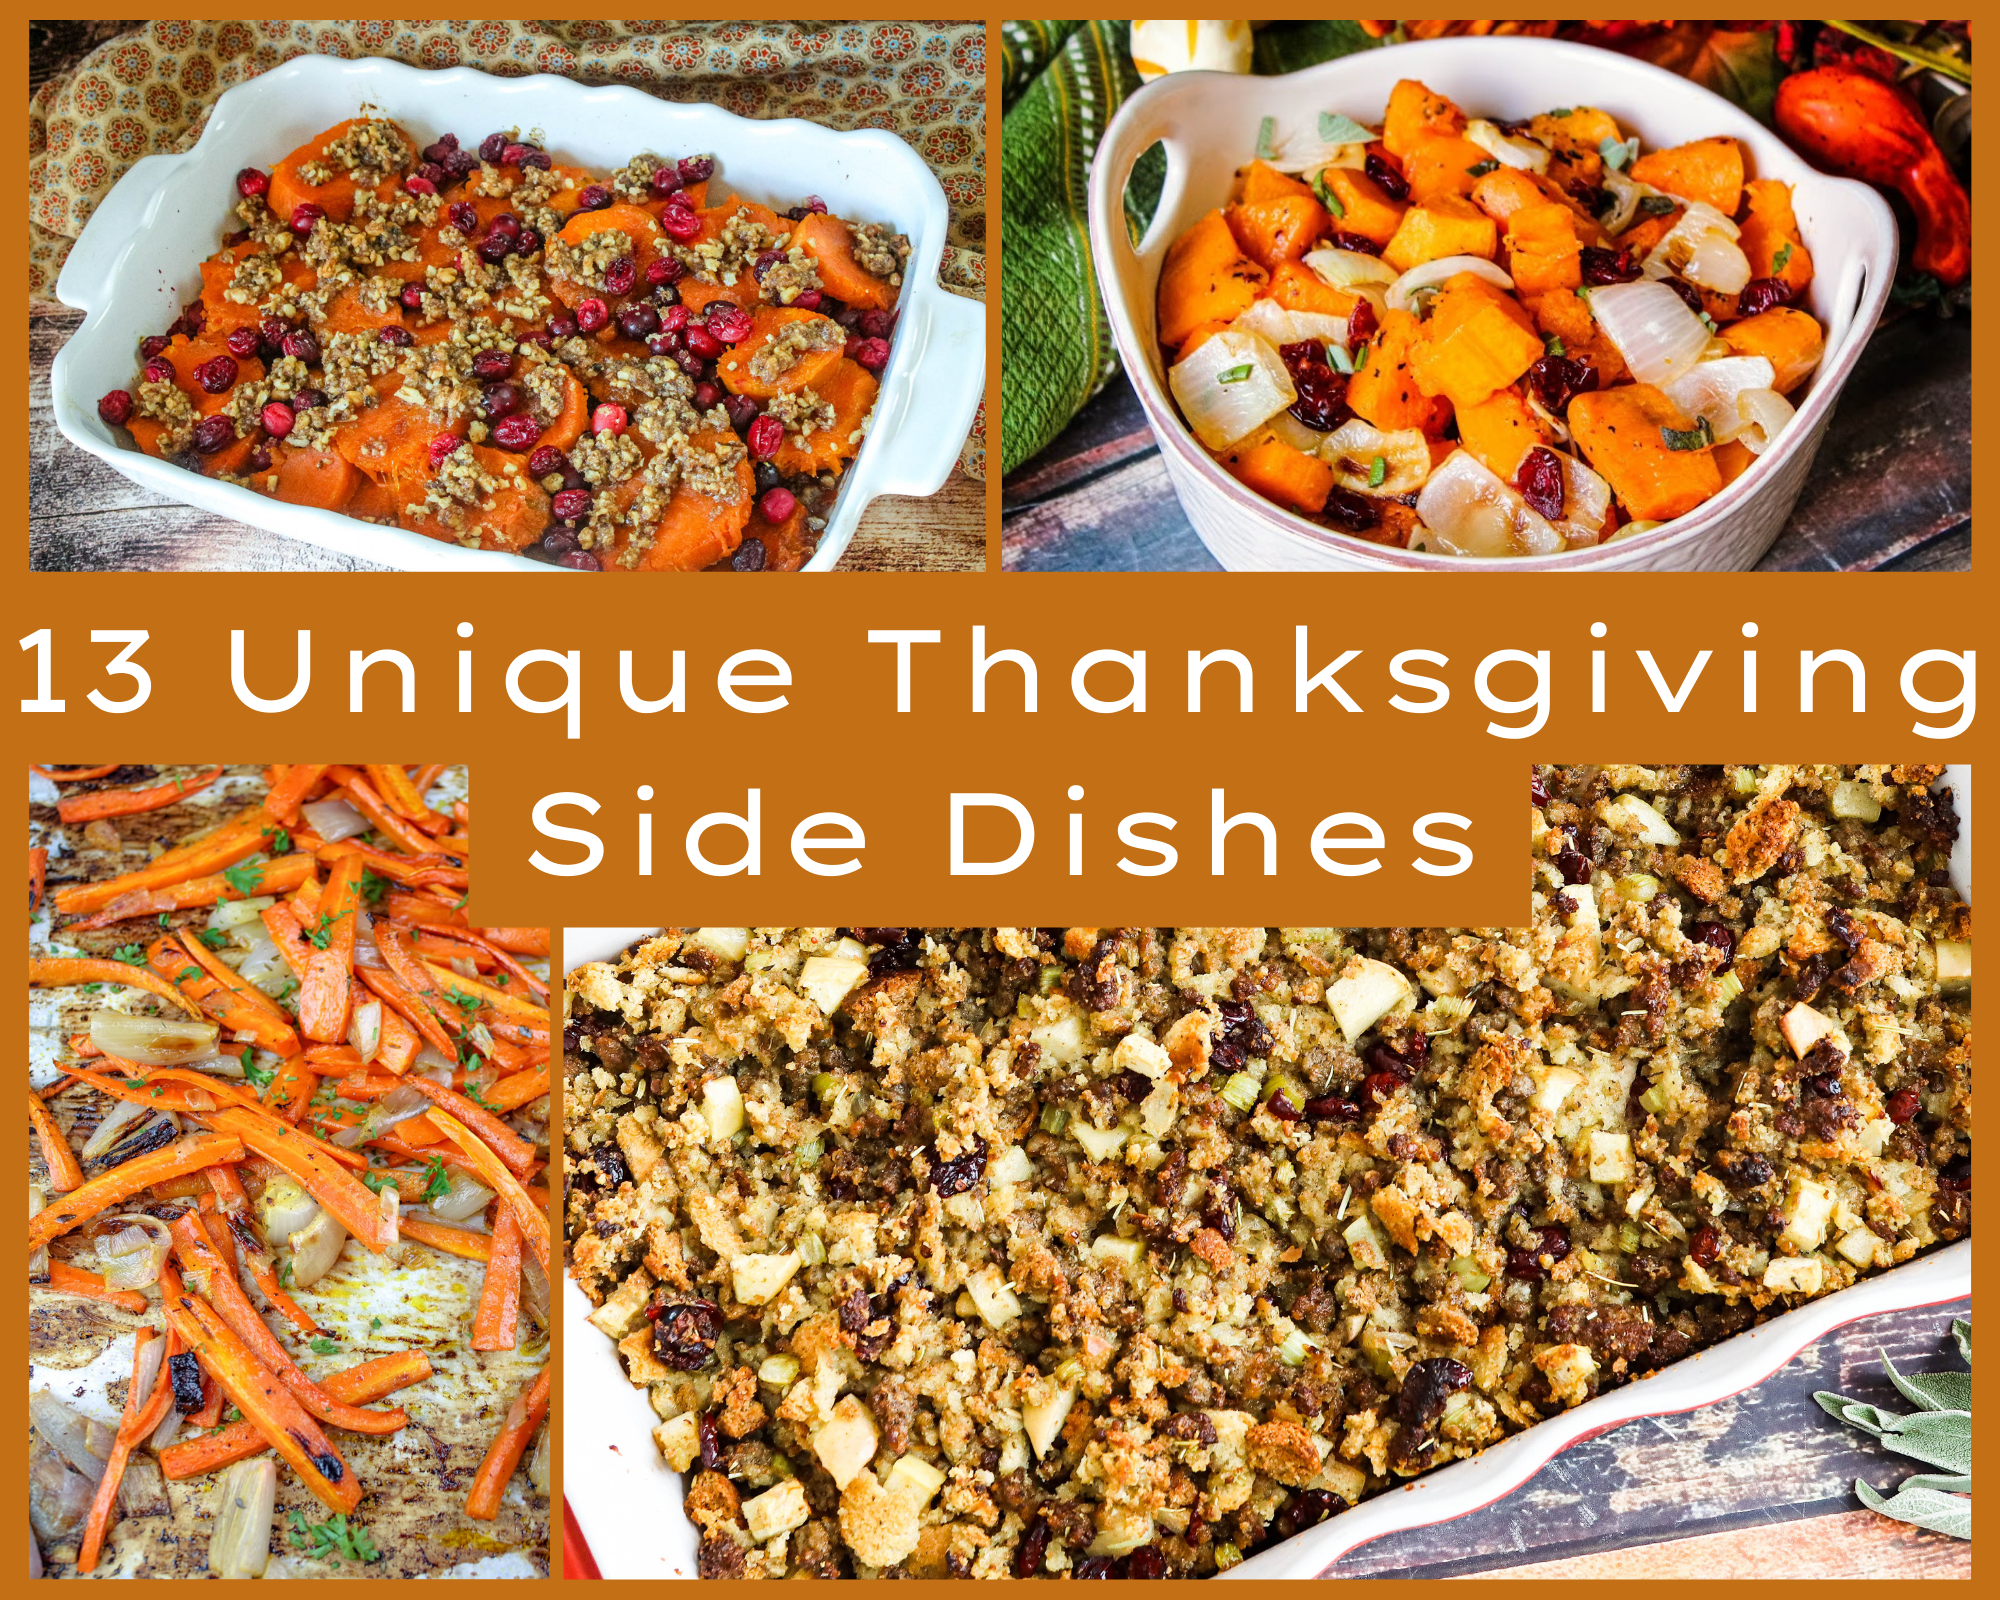 13 Unique Thanksgiving Side Dishes